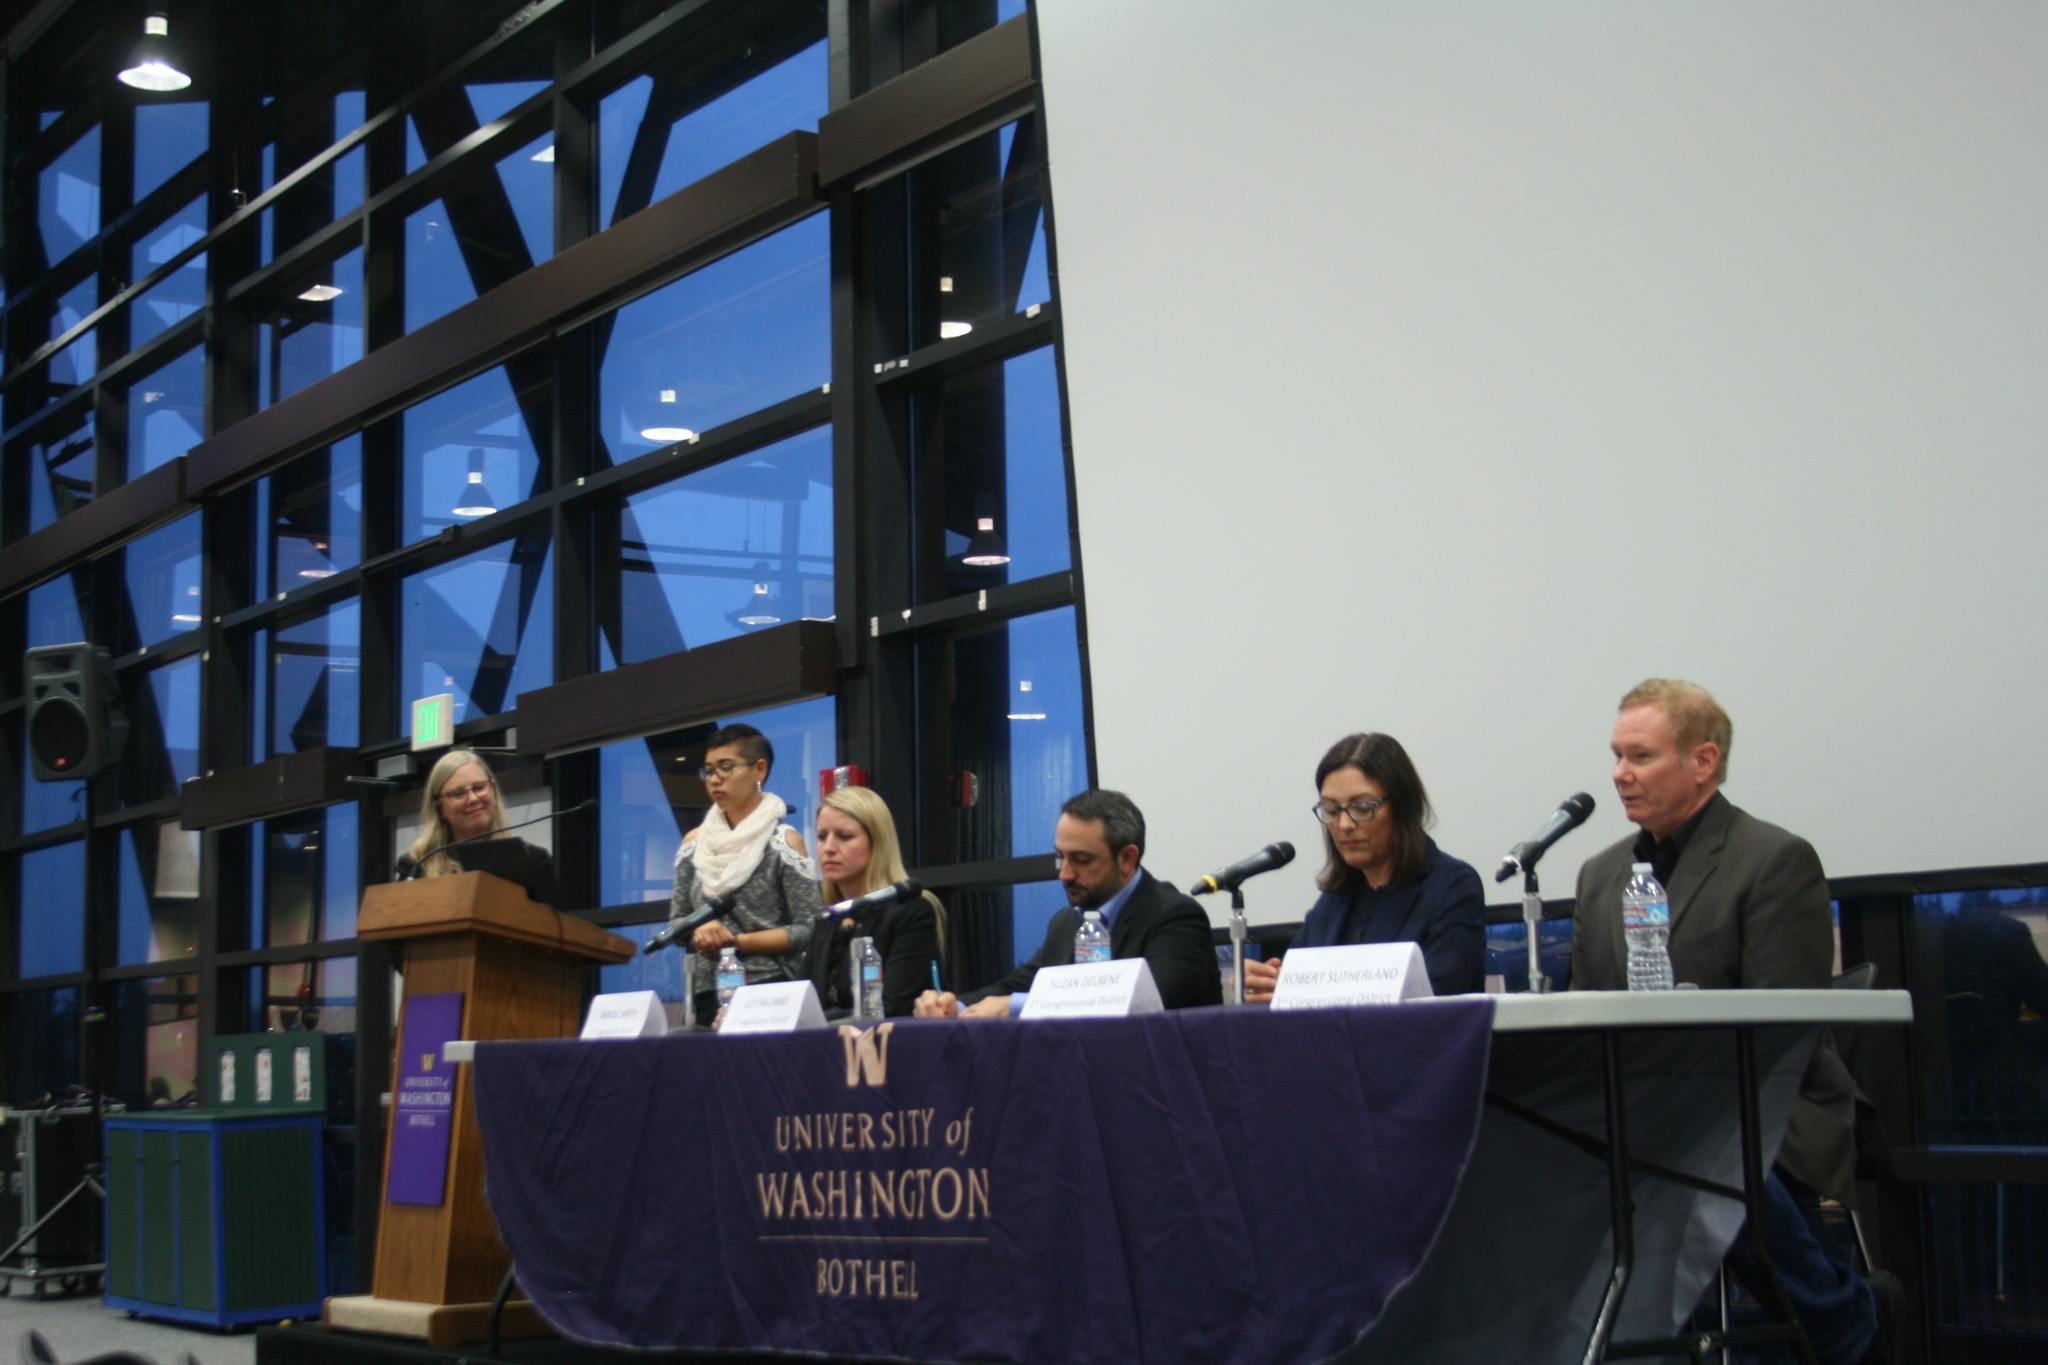 UW Bothell hosts forum for 1st Congressional District candidates